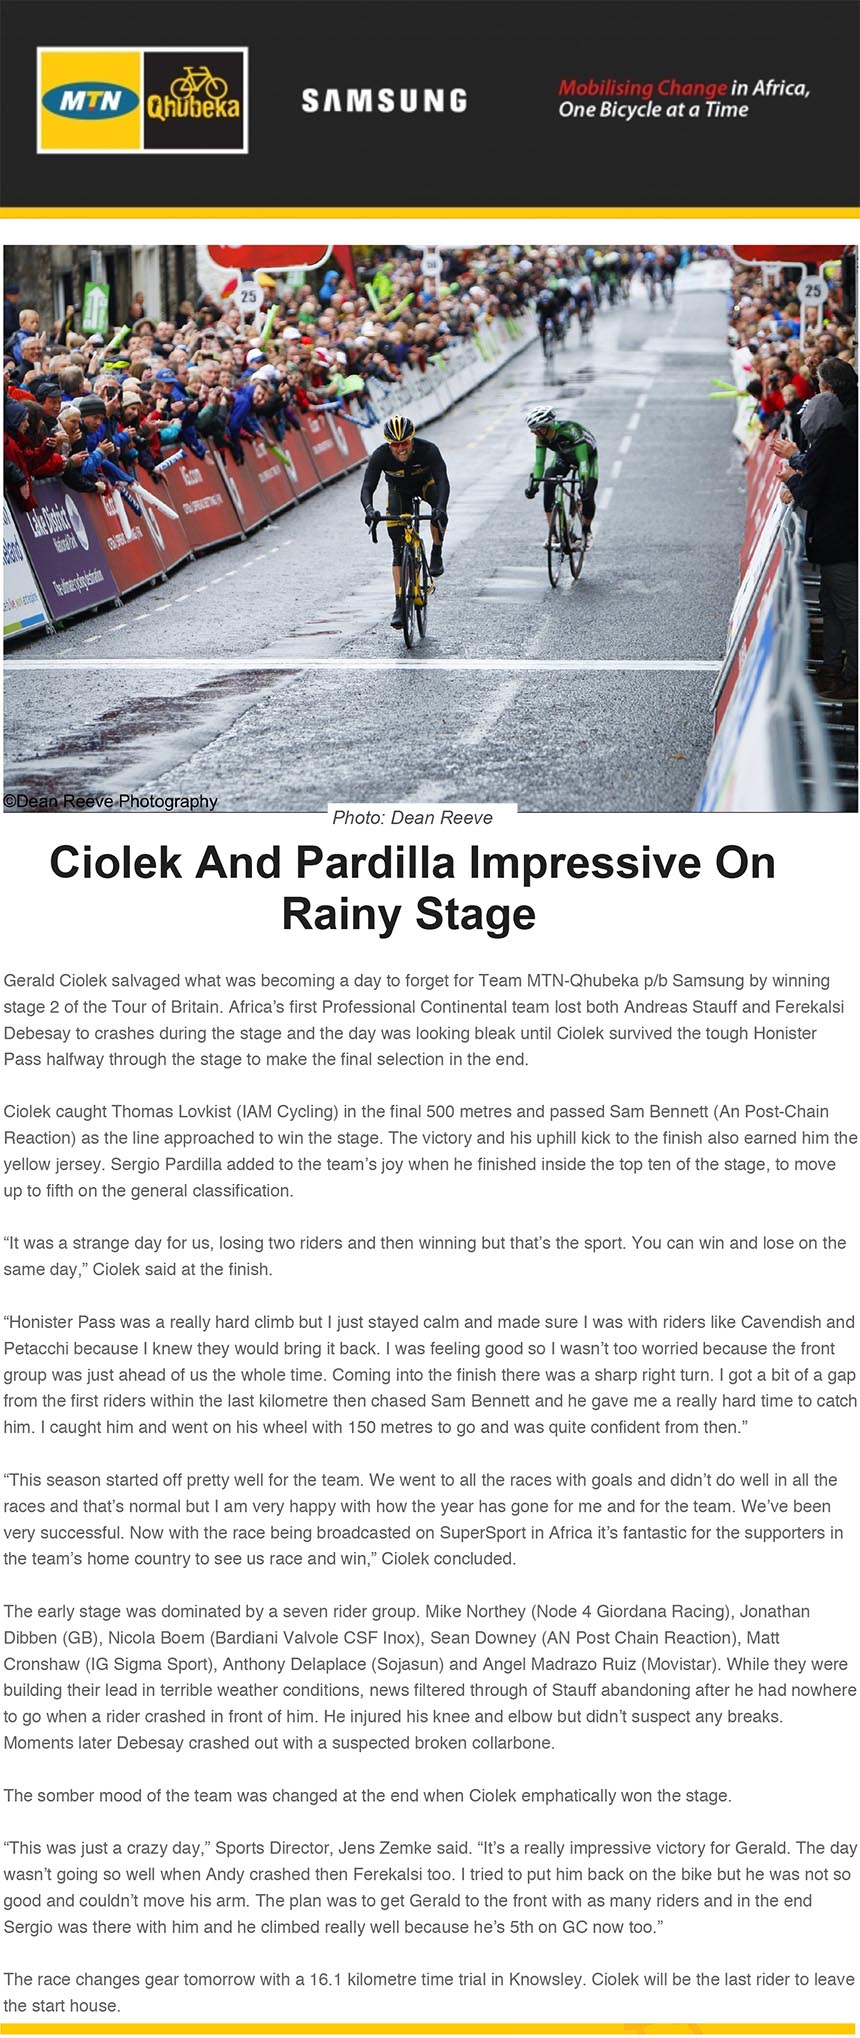 Ciolek And Pardilla Impressive On
Rainy Stage
Gerald Ciolek salvaged what was becoming a day to forget for Team MTN-Qhubeka p/b Samsung by winning
stage 2 of the Tour of Britain. Africa’s first Professional Continental team lost both Andreas Stauff and Ferekalsi
Debesay to crashes during the stage and the day was looking bleak until Ciolek survived the tough Honister
bikenews@libero.it
A: redazione@bikenews.it
Rispondi a: "bikenews@libero.it" <bikenews@libero.it>
I: Gerald Ciolek Storms To Victory in Britain
16 settembre 2013 21:36
Pass halfway through the stage to make the final selection in the end.
Ciolek caught Thomas Lovkist (IAM Cycling) in the final 500 metres and passed Sam Bennett (An Post-Chain
Reaction) as the line approached to win the stage. The victory and his uphill kick to the finish also earned him the
yellow jersey. Sergio Pardilla added to the team’s joy when he finished inside the top ten of the stage, to move
up to fifth on the general classification.
“It was a strange day for us, losing two riders and then winning but that’s the sport. You can win and lose on the
same day,” Ciolek said at the finish.
“Honister Pass was a really hard climb but I just stayed calm and made sure I was with riders like Cavendish and
Petacchi because I knew they would bring it back. I was feeling good so I wasn’t too worried because the front
group was just ahead of us the whole time. Coming into the finish there was a sharp right turn. I got a bit of a gap
from the first riders within the last kilometre then chased Sam Bennett and he gave me a really hard time to catch
him. I caught him and went on his wheel with 150 metres to go and was quite confident from then.”
“This season started off pretty well for the team. We went to all the races with goals and didn’t do well in all the
races and that’s normal but I am very happy with how the year has gone for me and for the team. We’ve been
very successful. Now with the race being broadcasted on SuperSport in Africa it’s fantastic for the supporters in
the team’s home country to see us race and win,” Ciolek concluded.
The early stage was dominated by a seven rider group. Mike Northey (Node 4 Giordana Racing), Jonathan
Dibben (GB), Nicola Boem (Bardiani Valvole CSF Inox), Sean Downey (AN Post Chain Reaction), Matt
Cronshaw (IG Sigma Sport), Anthony Delaplace (Sojasun) and Angel Madrazo Ruiz (Movistar). While they were
building their lead in terrible weather conditions, news filtered through of Stauff abandoning after he had nowhere
to go when a rider crashed in front of him. He injured his knee and elbow but didn’t suspect any breaks.
Moments later Debesay crashed out with a suspected broken collarbone.
The somber mood of the team was changed at the end when Ciolek emphatically won the stage.
“This was just a crazy day,” Sports Director, Jens Zemke said. “It’s a really impressive victory for Gerald. The day
wasn’t going so well when Andy crashed then Ferekalsi too. I tried to put him back on the bike but he was not so
good and couldn’t move his arm. The plan was to get Gerald to the front with as many riders and in the end
Sergio was there with him and he climbed really well because he’s 5th on GC now too.”
The race changes gear tomorrow with a 16.1 kilometre time trial in Knowsley. Ciolek will be